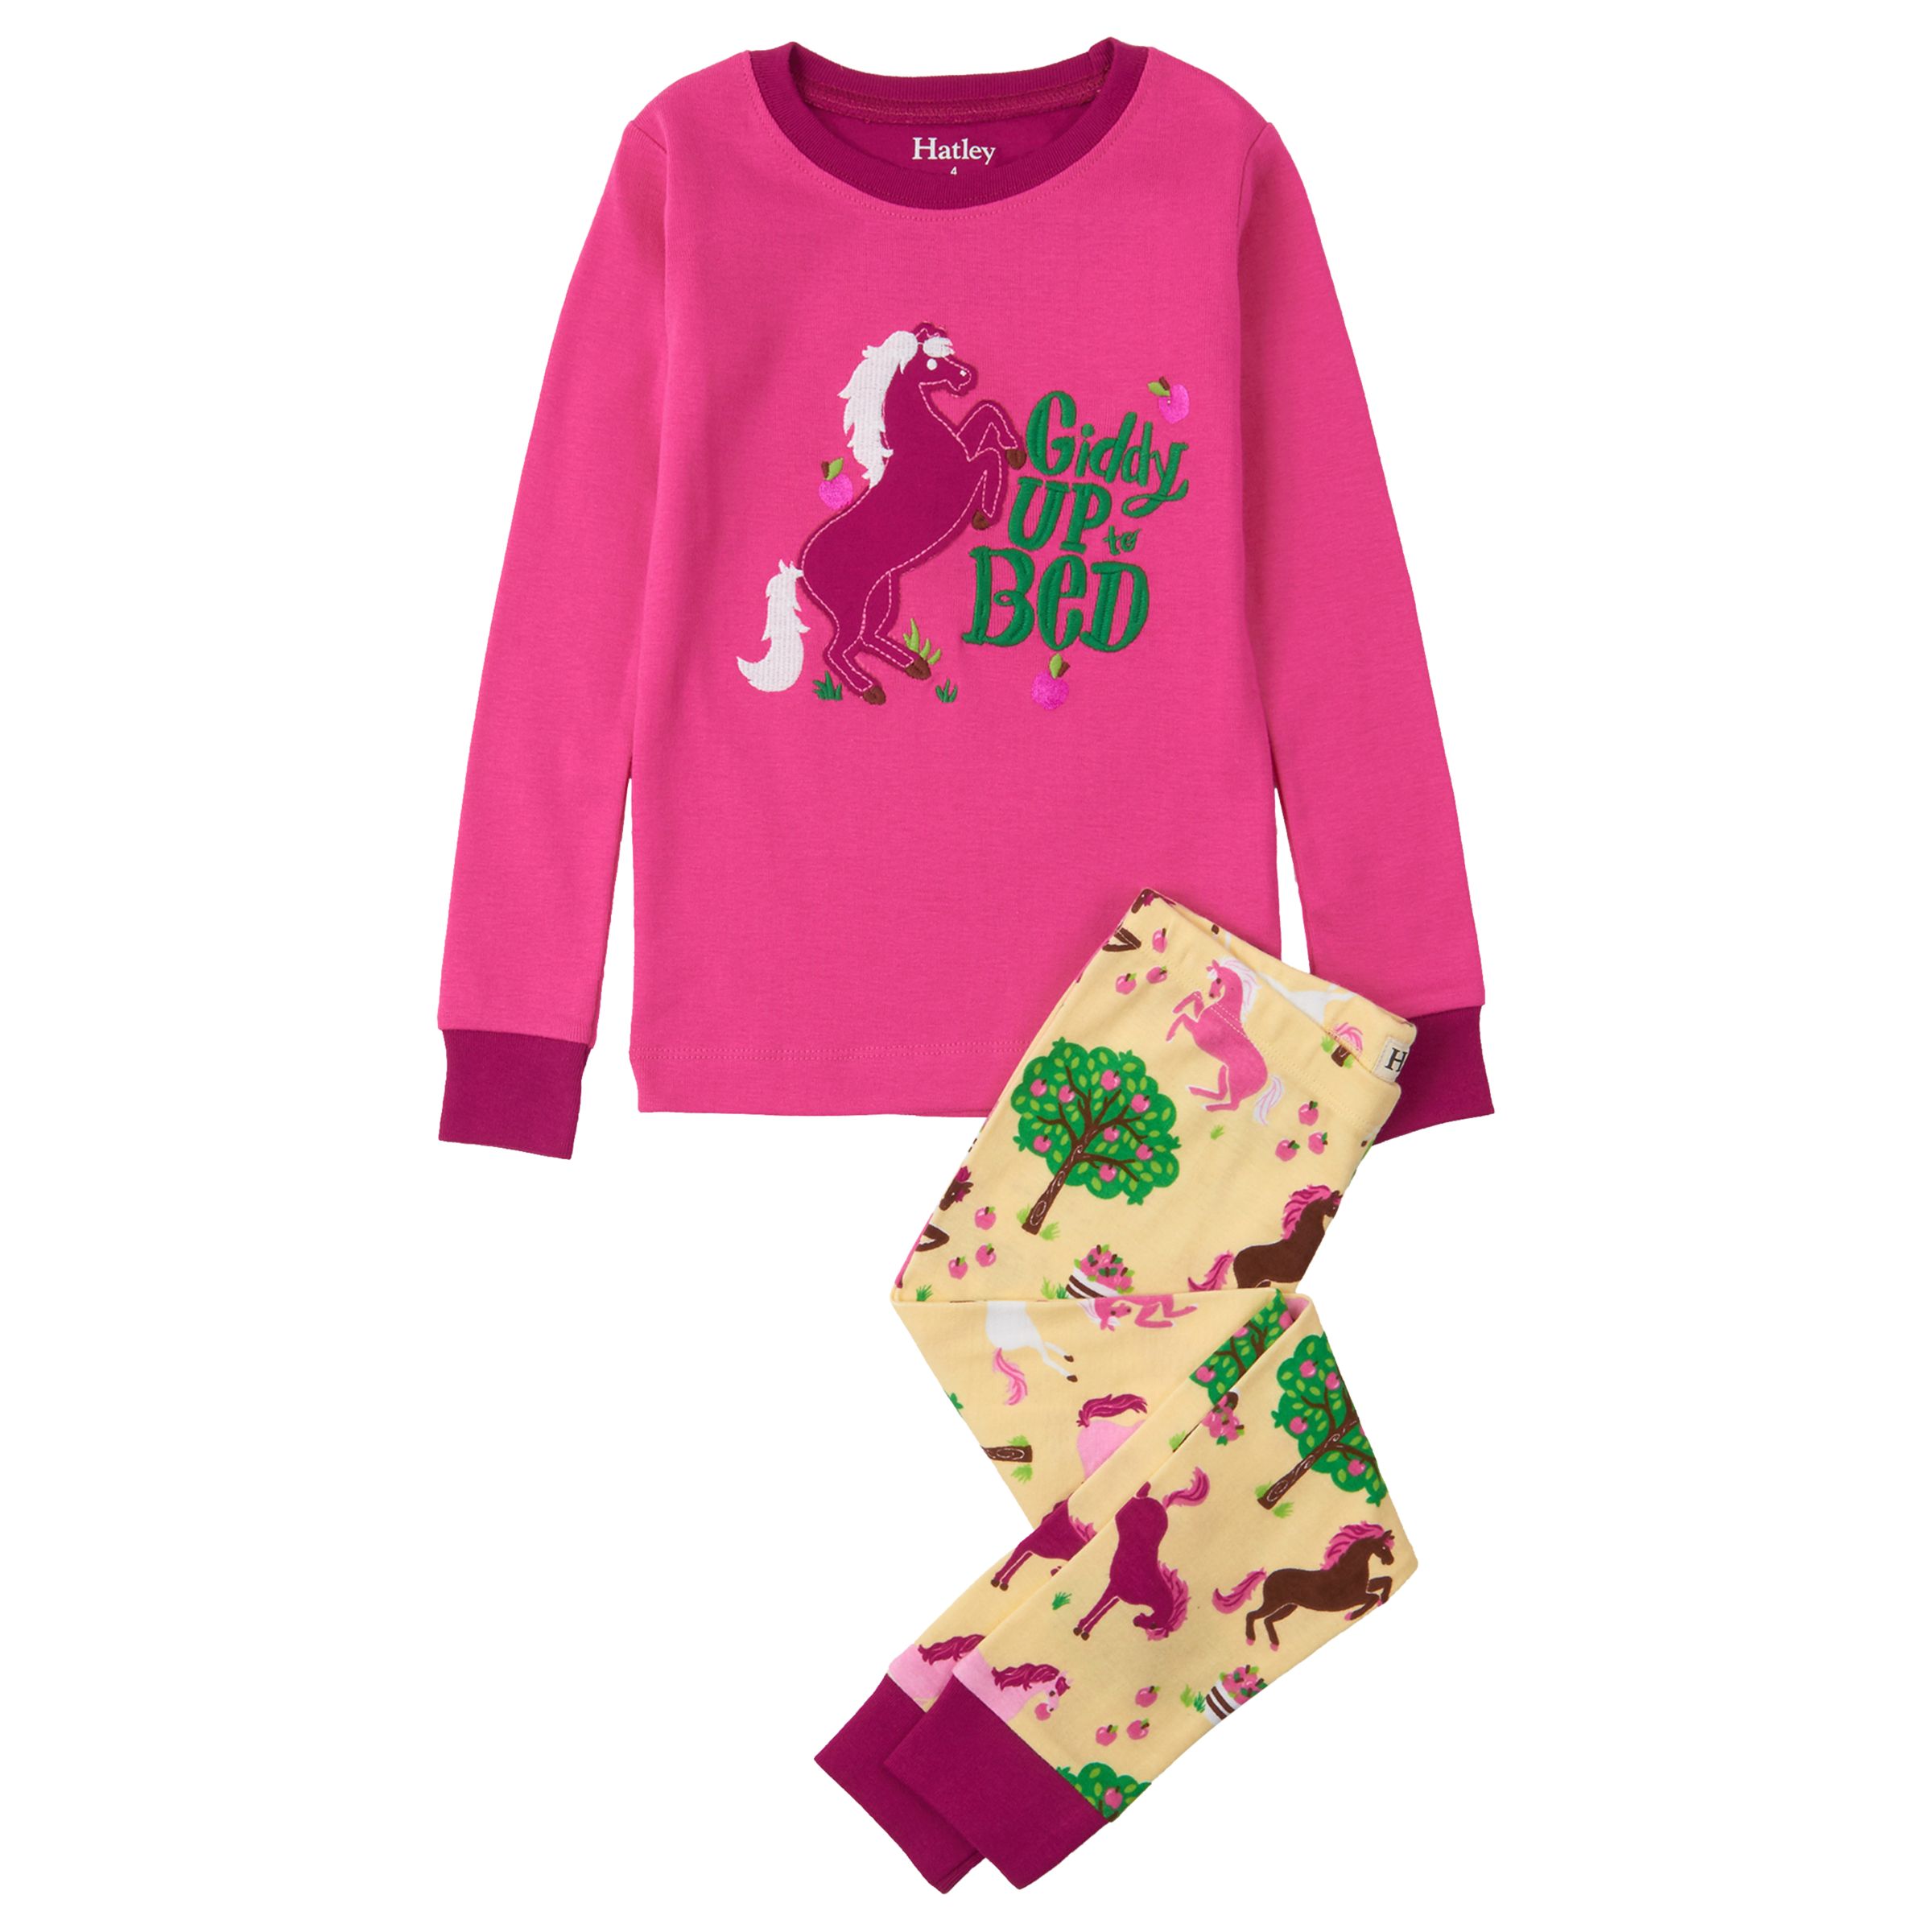 Hatley Children's Giddy Up To Bed Applique Pyjamas, Pink/Yellow